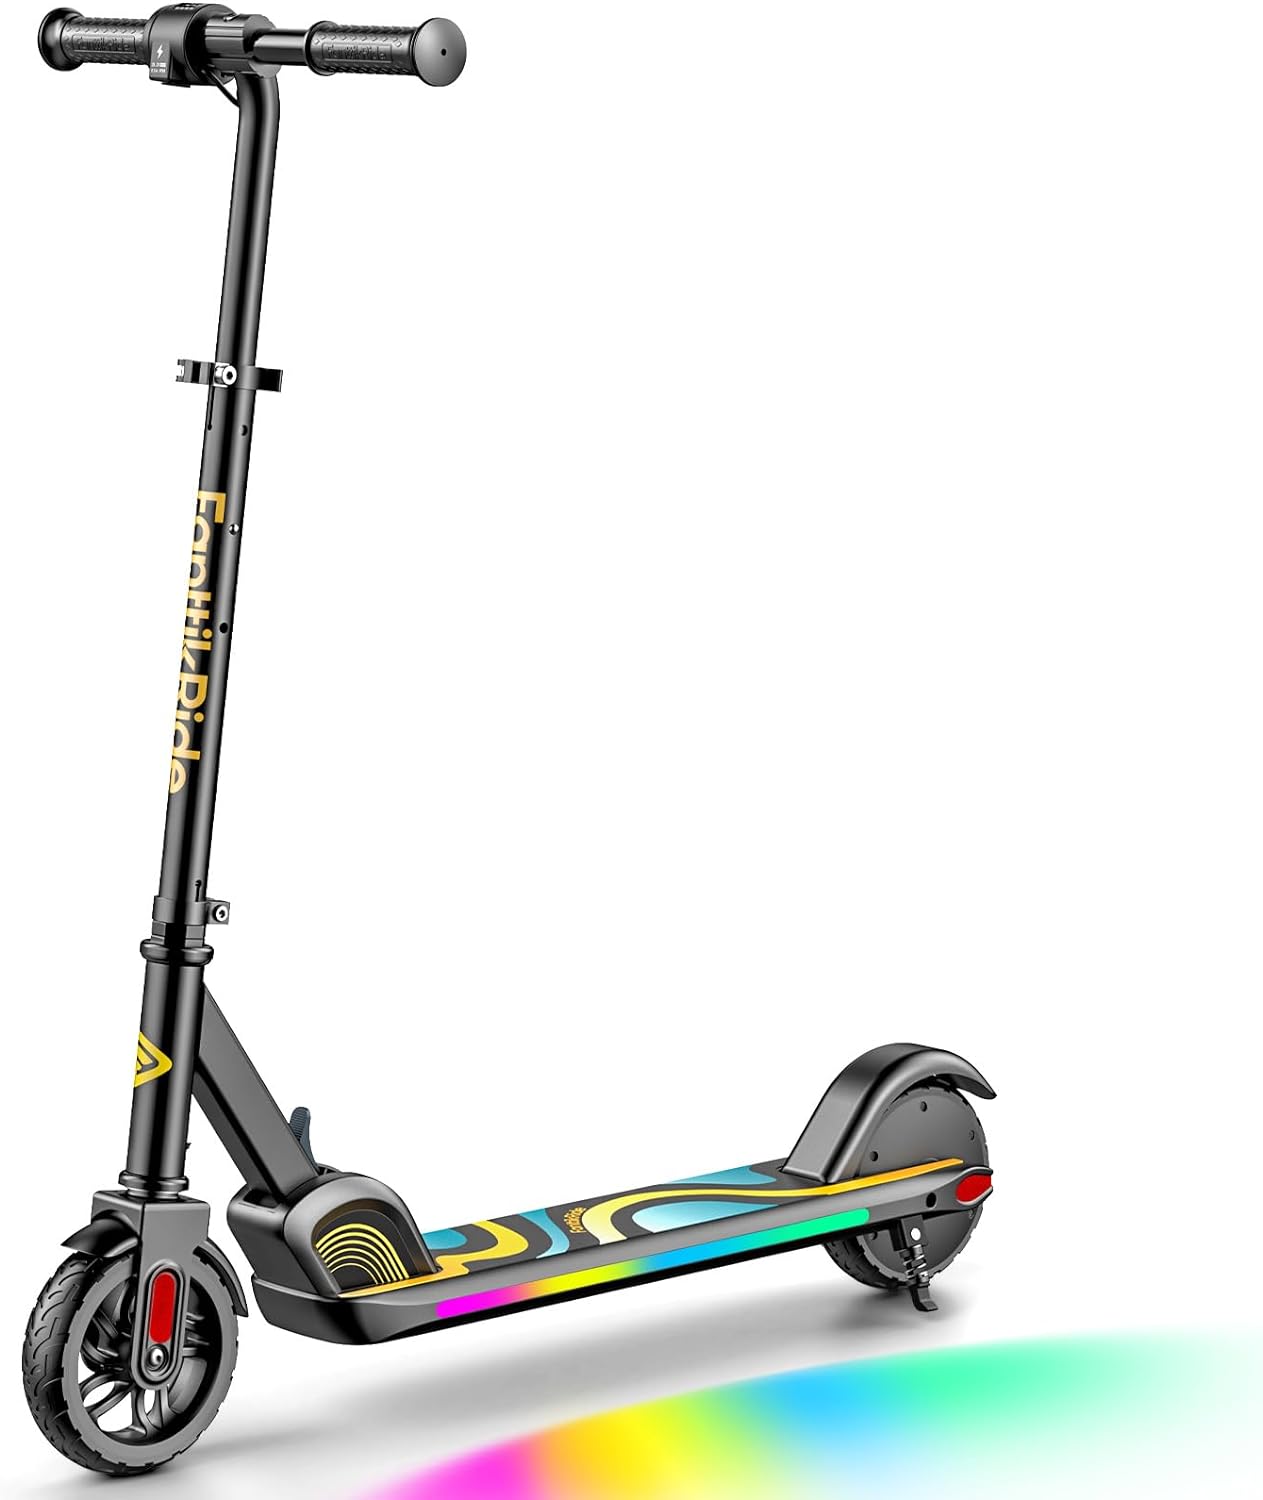 C9 Pro Electric Scooter Review